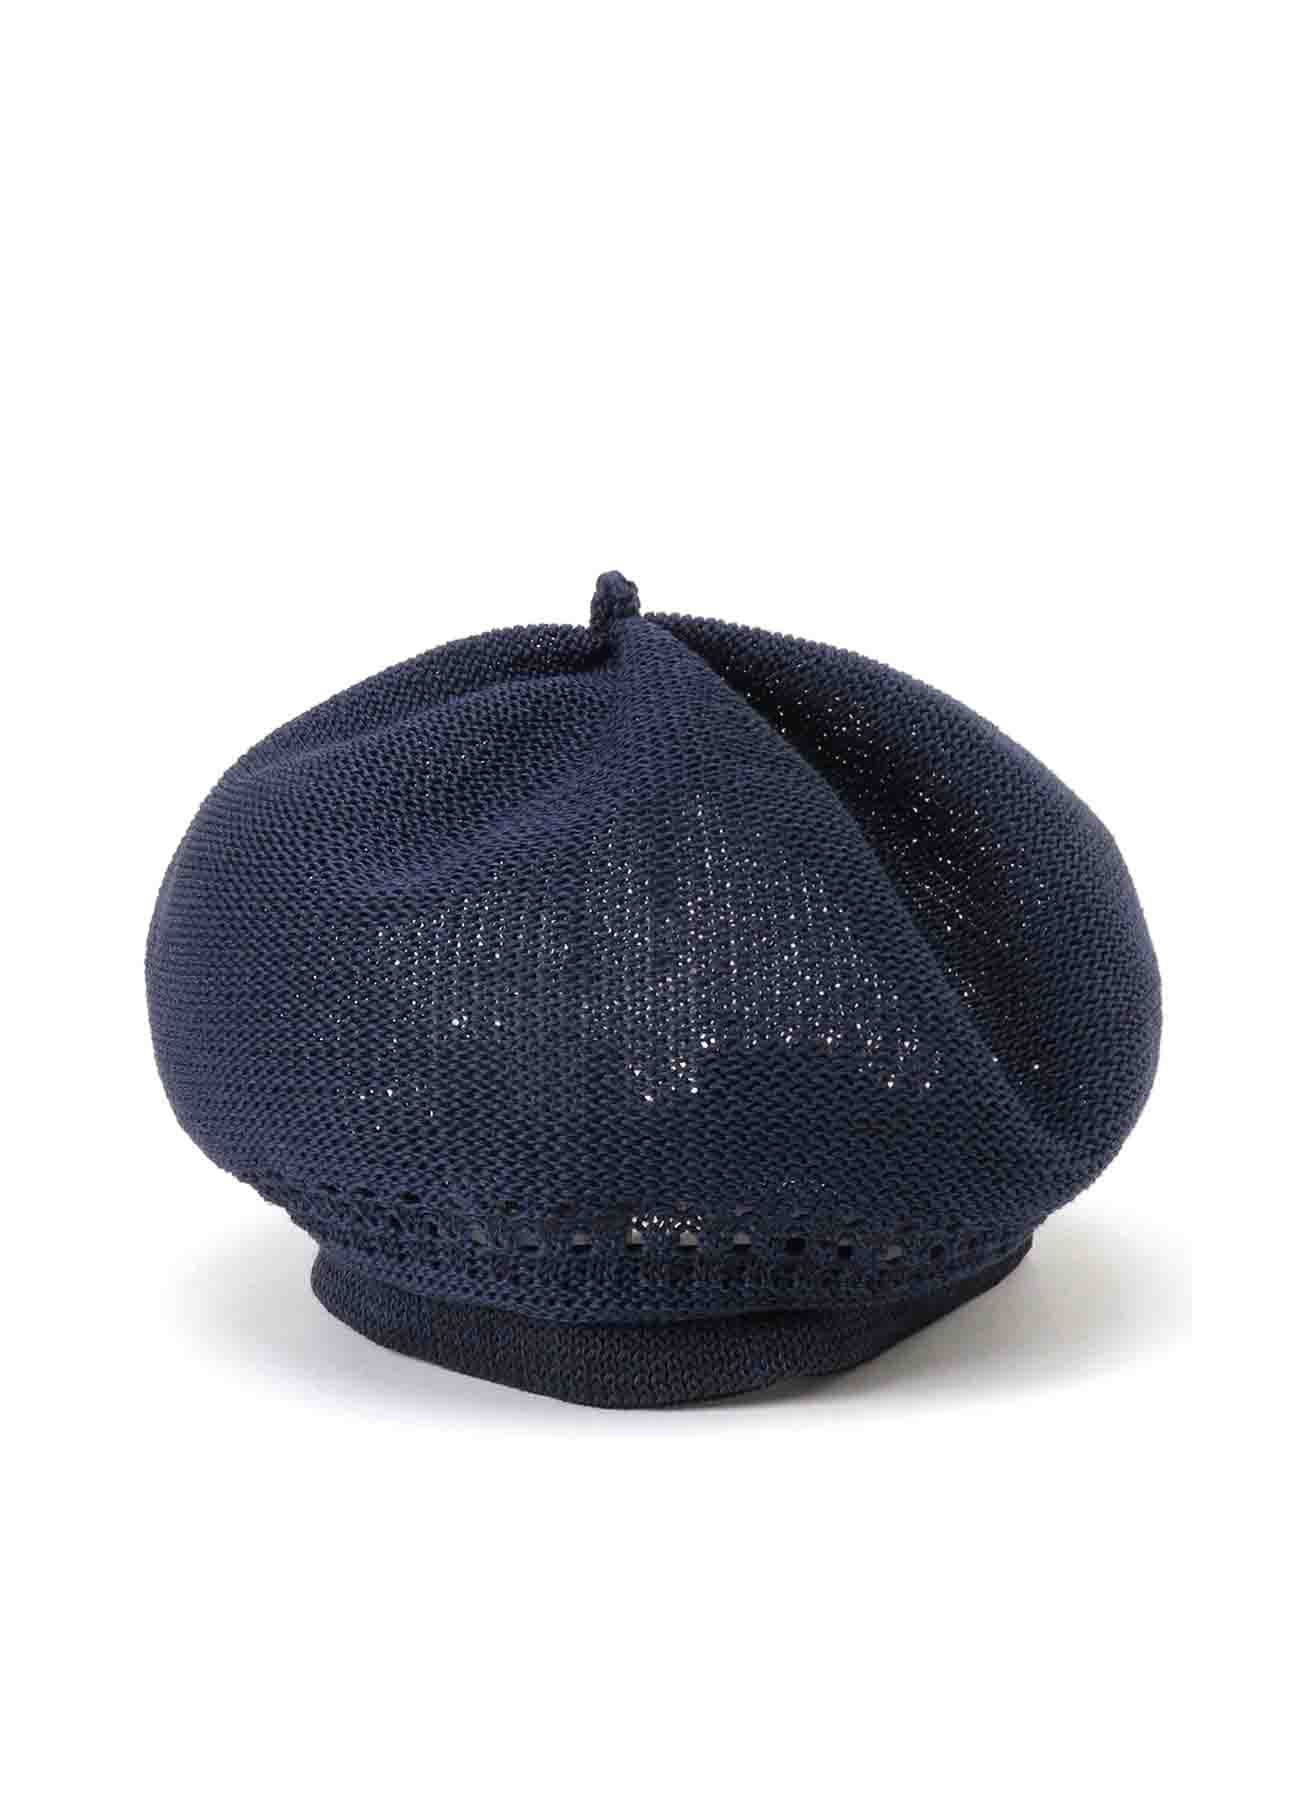 COTTON OPEN WORK KNITTED BERET